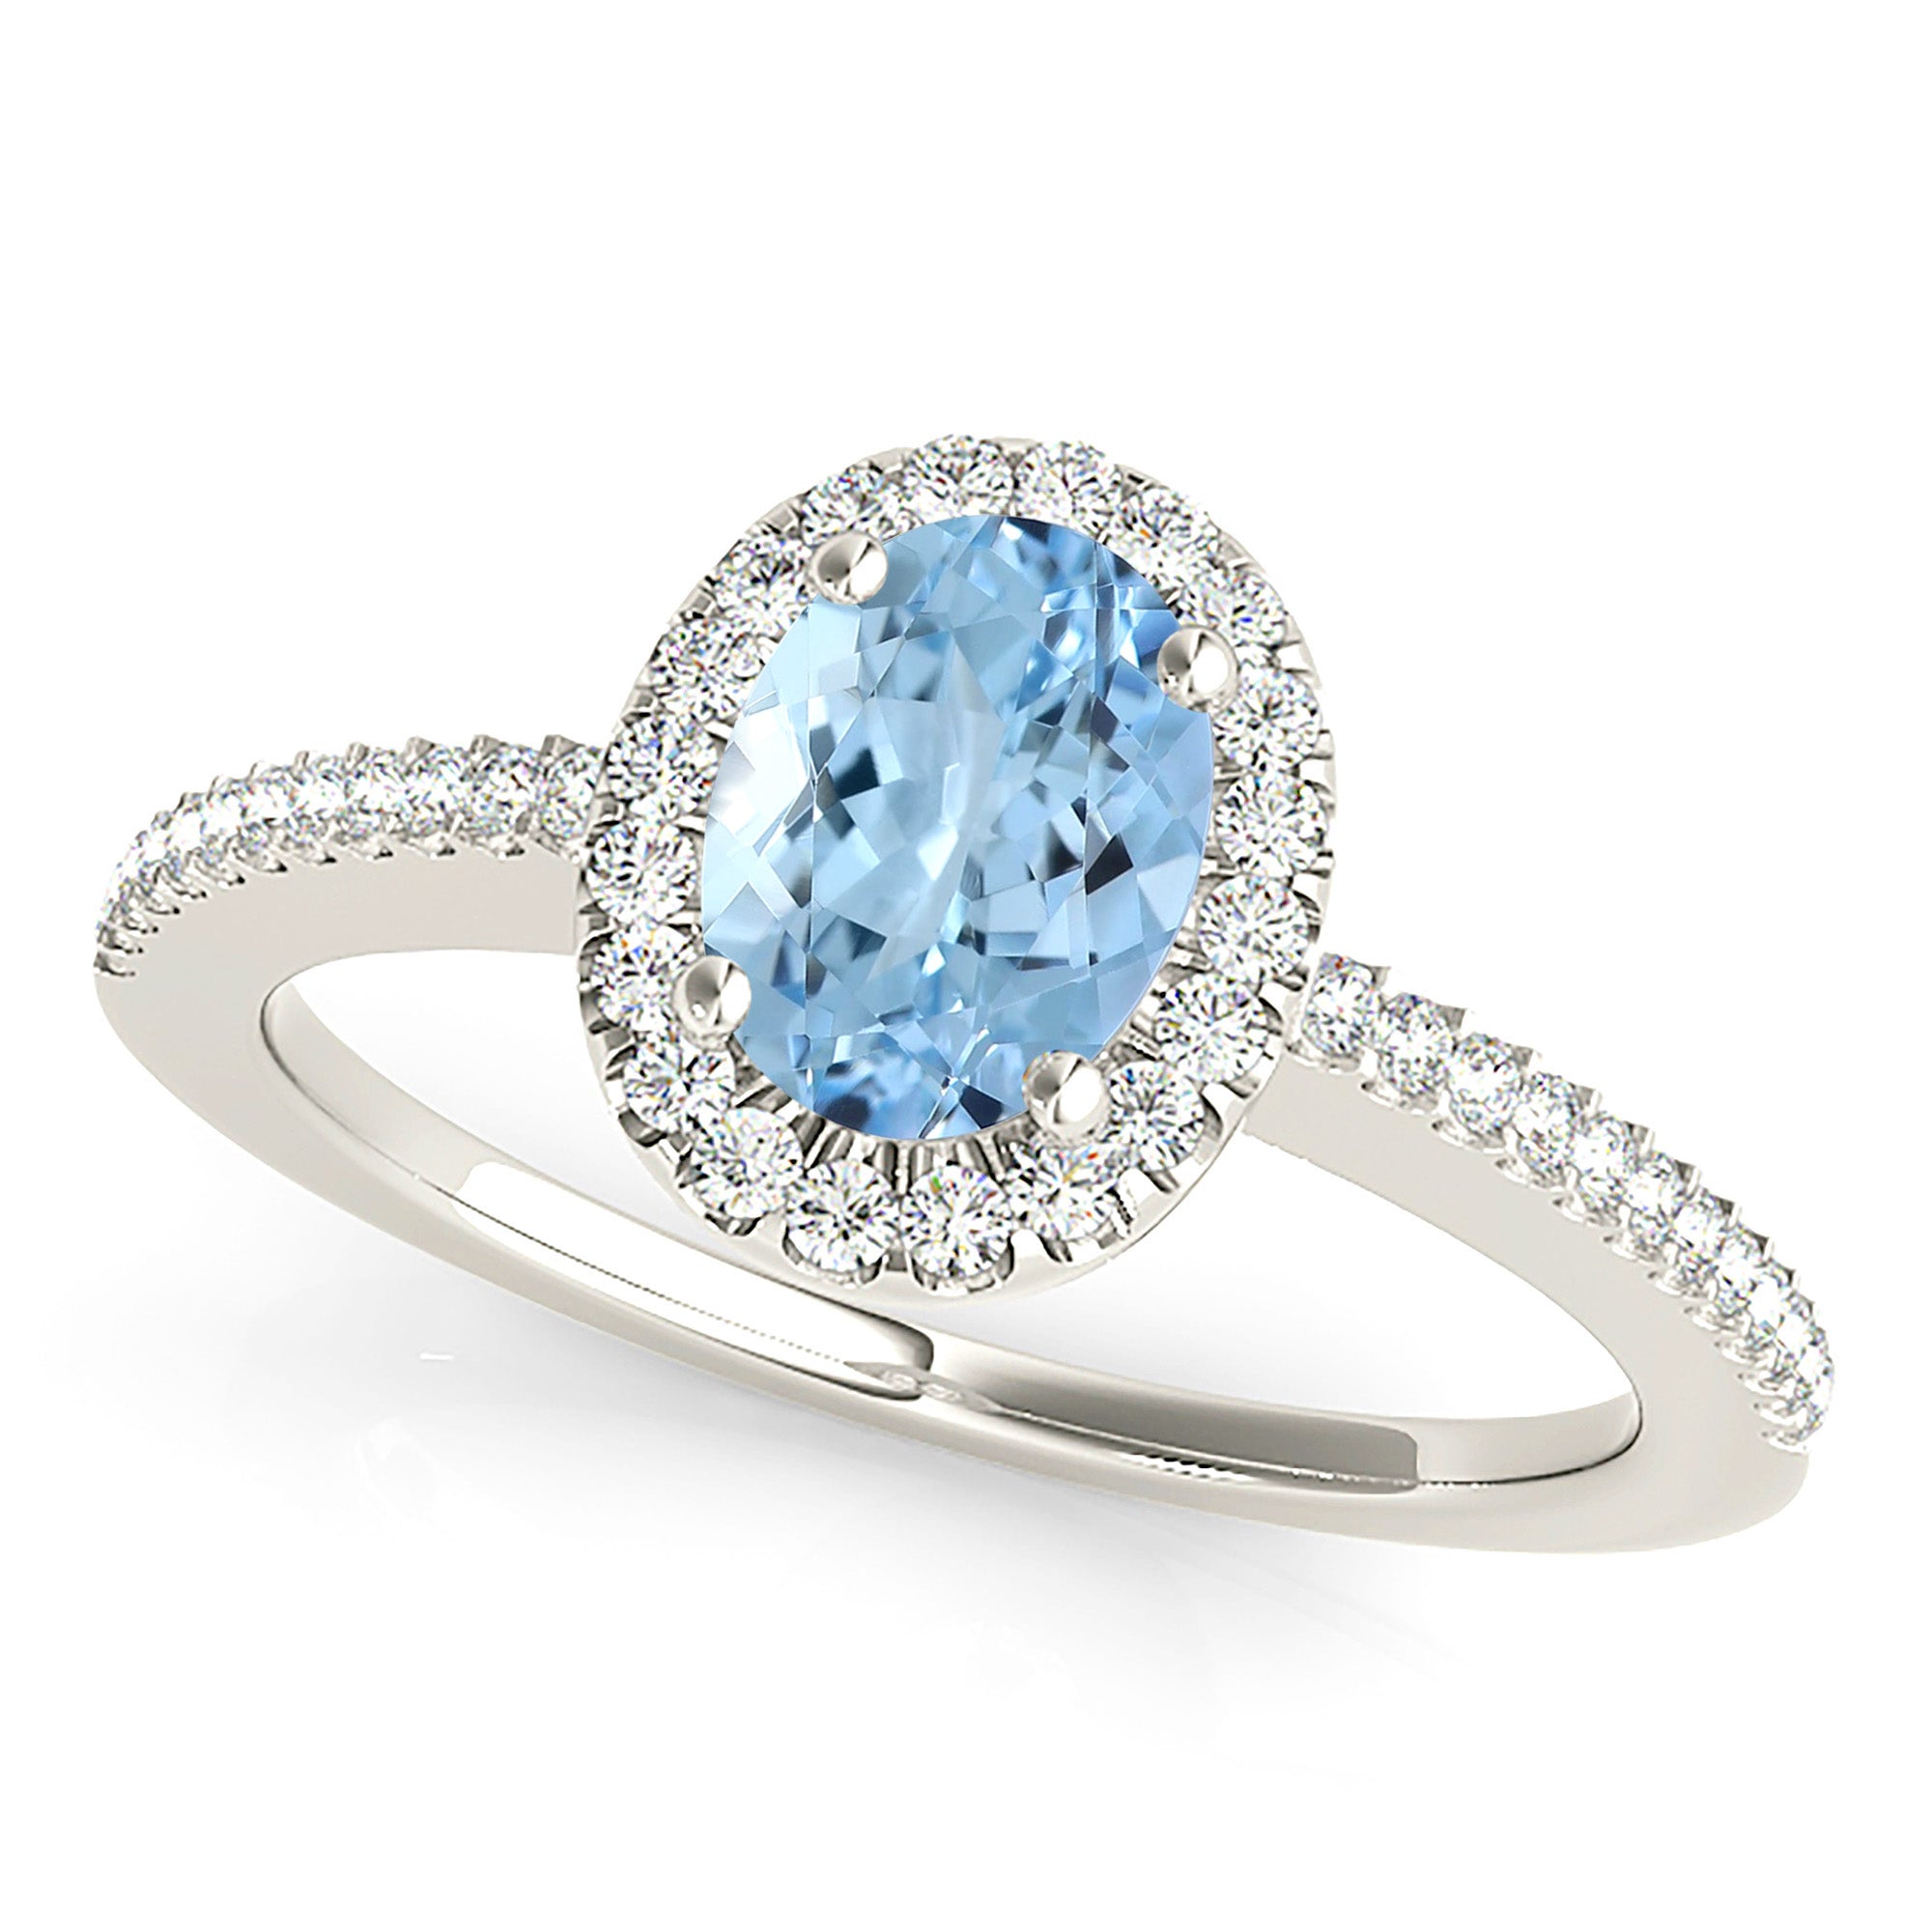 0.97 ct. Genuine Oval Aquamarine Ring With 0.20 ctw. Diamond Halo and Delicate Diamond Band | Oval Blue Aquamarine Halo Ring-in 14K/18K White, Yellow, Rose Gold and Platinum - Christmas Jewelry Gift -VIRABYANI